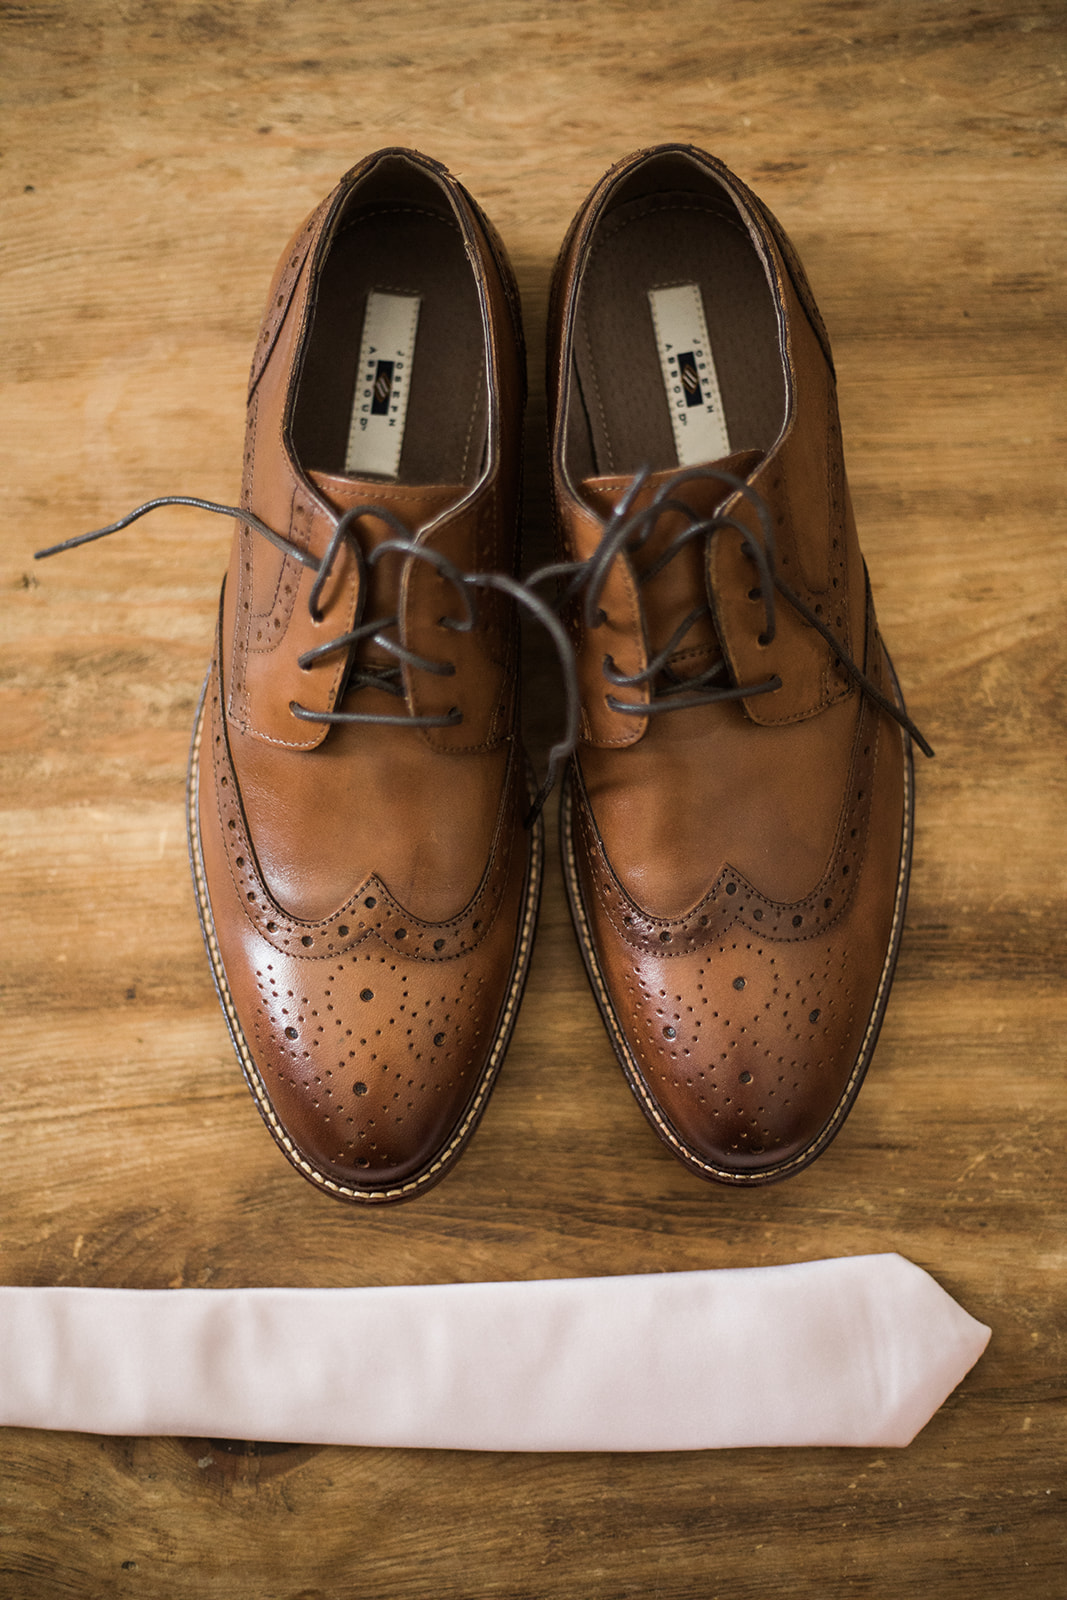 groom's shoes and tie Silverpick Lodge